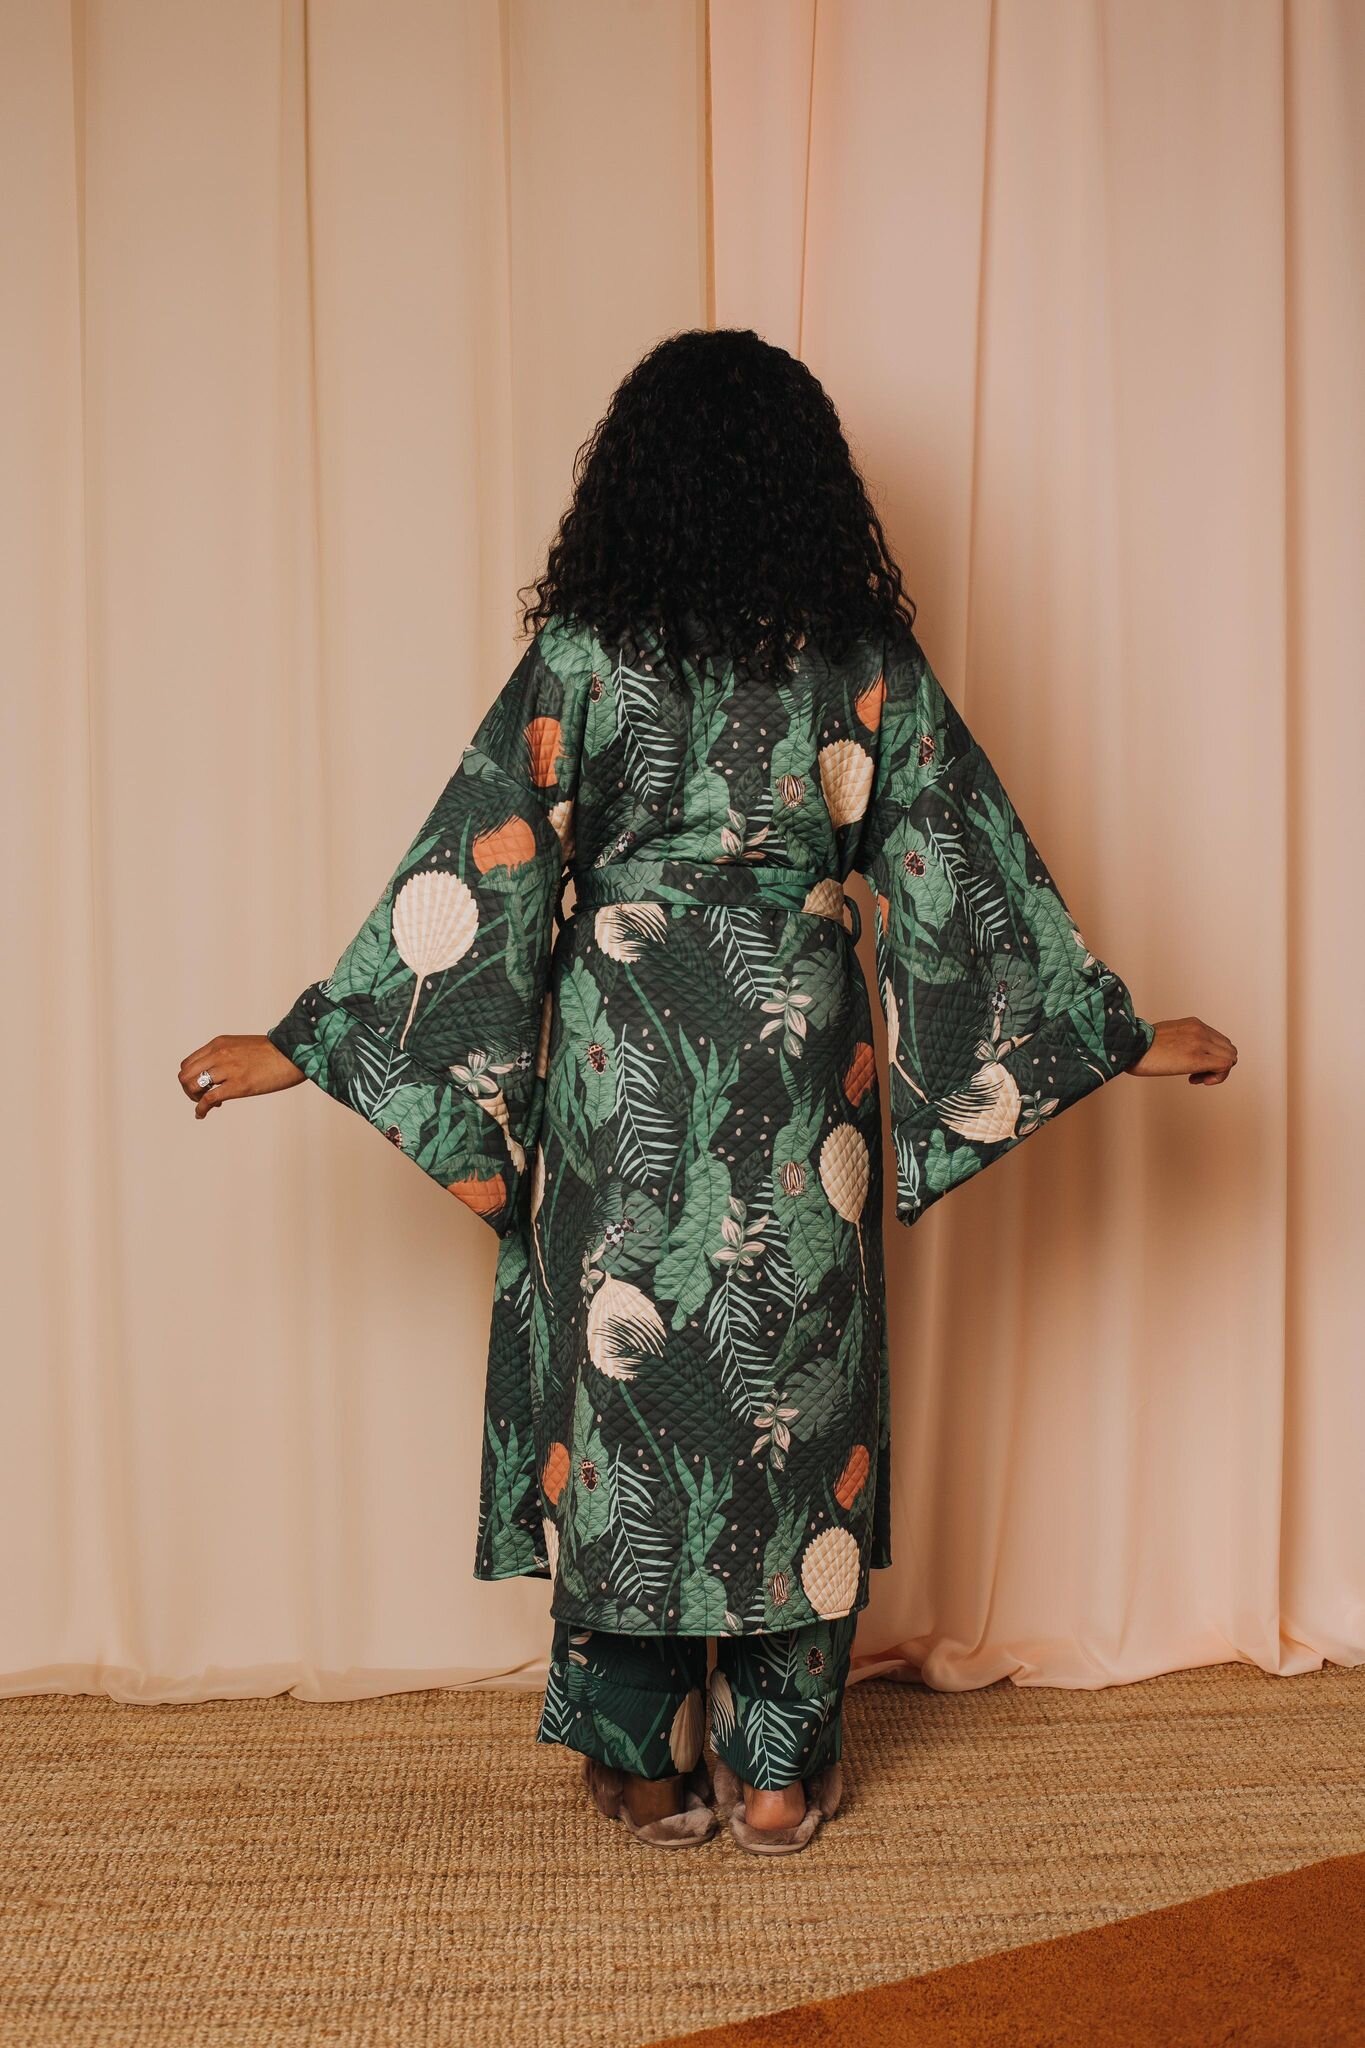 Luxury green jungle print dressing gown, made to order in the UK